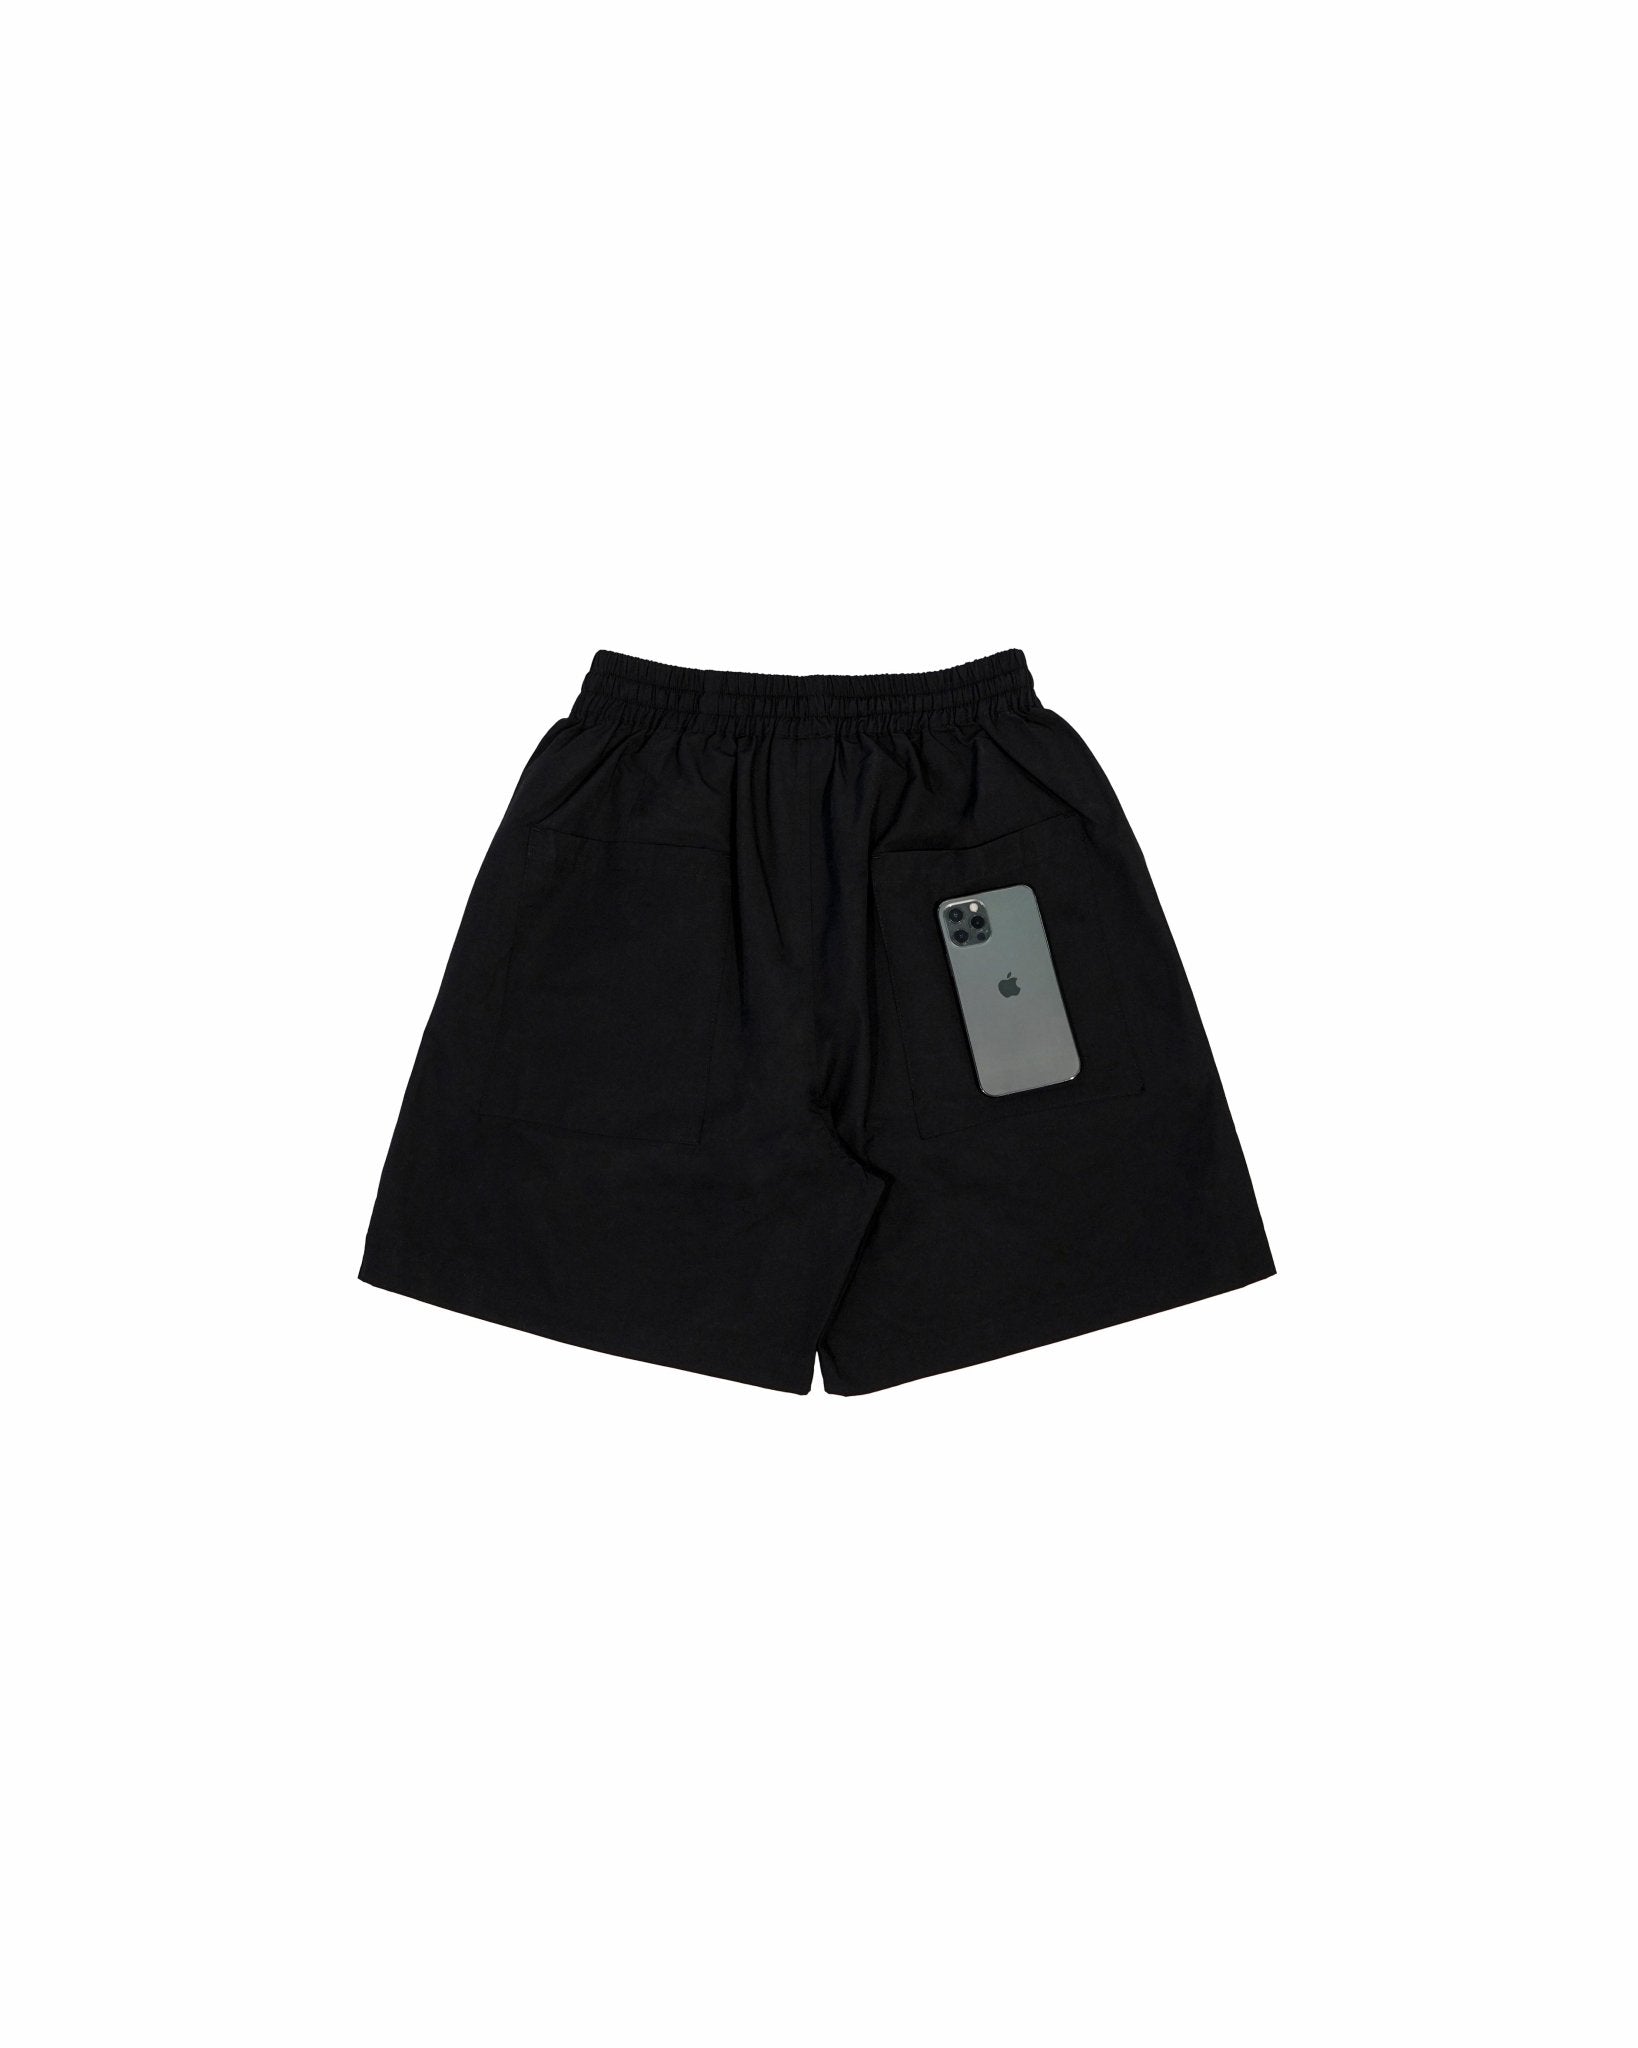 Relaxed Elasticated Shorts - Black - G R A Y E